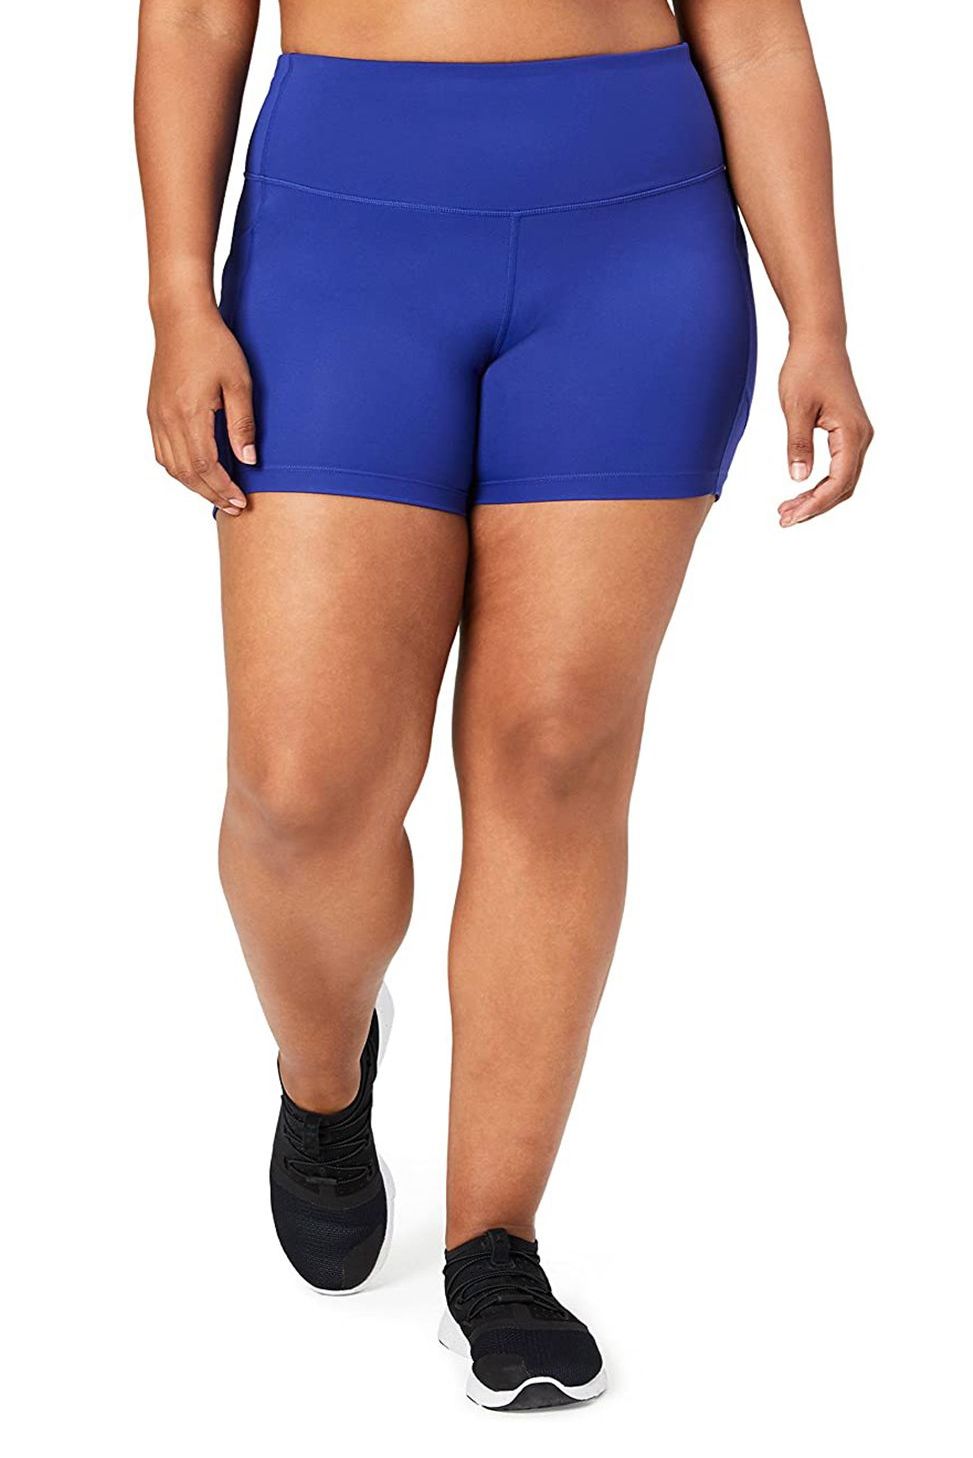 Race Day High Waist Compression Short with Pockets 